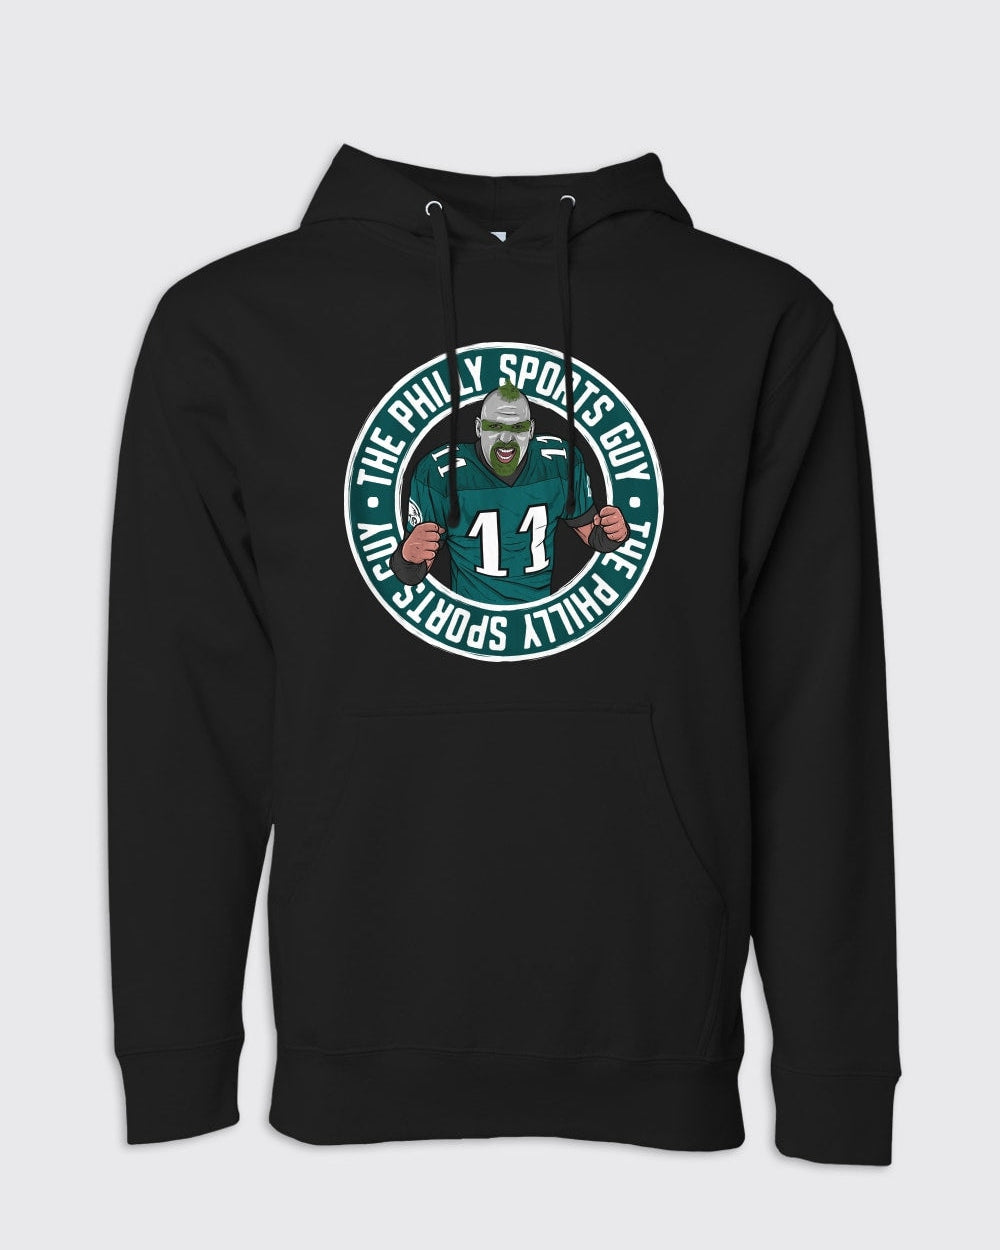 The Philly Sports Guy Logo Hoodie - Philly Sports Shirts